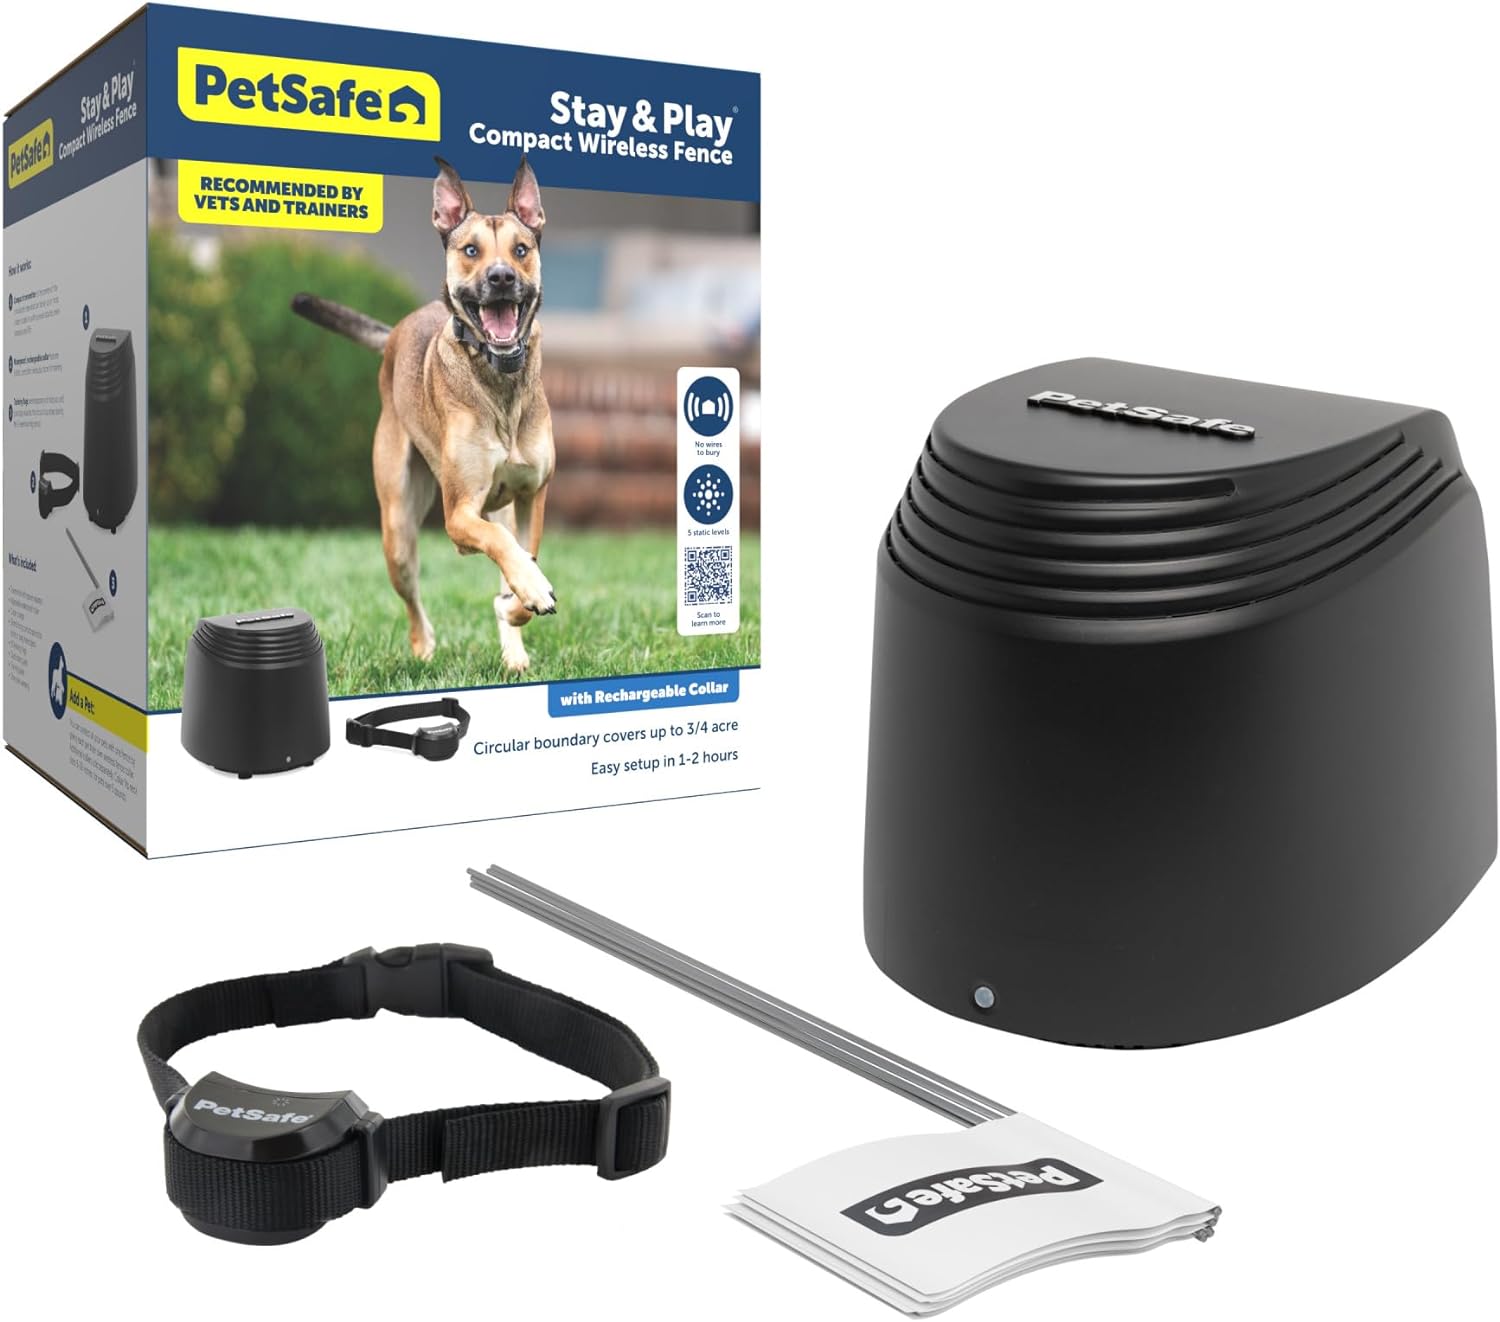 PetSafe Stay  Play Compact Wireless Pet Fence, No Wire Circular Boundary, Secure up to 3/4 Acre, No-Dig Portable Fencing, Americas Safest Fence From Parent Company INVISIBLE FENCE Brand